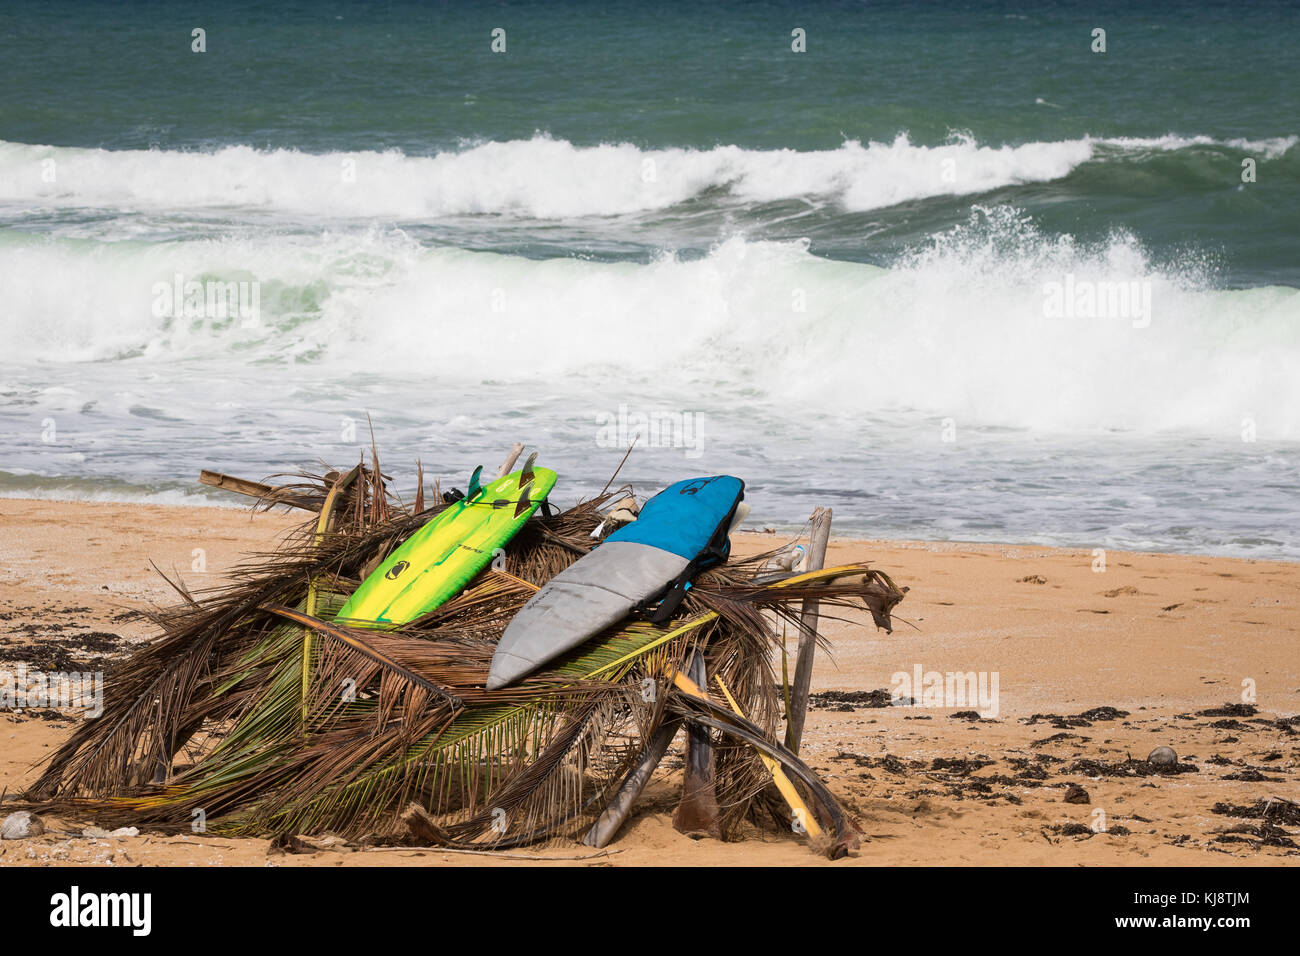 Surf boards sit ready for use during their La Comprita charitable surf competition in Aviones, Puerto Rico, Nov. 11, 2017. The Stock Photo